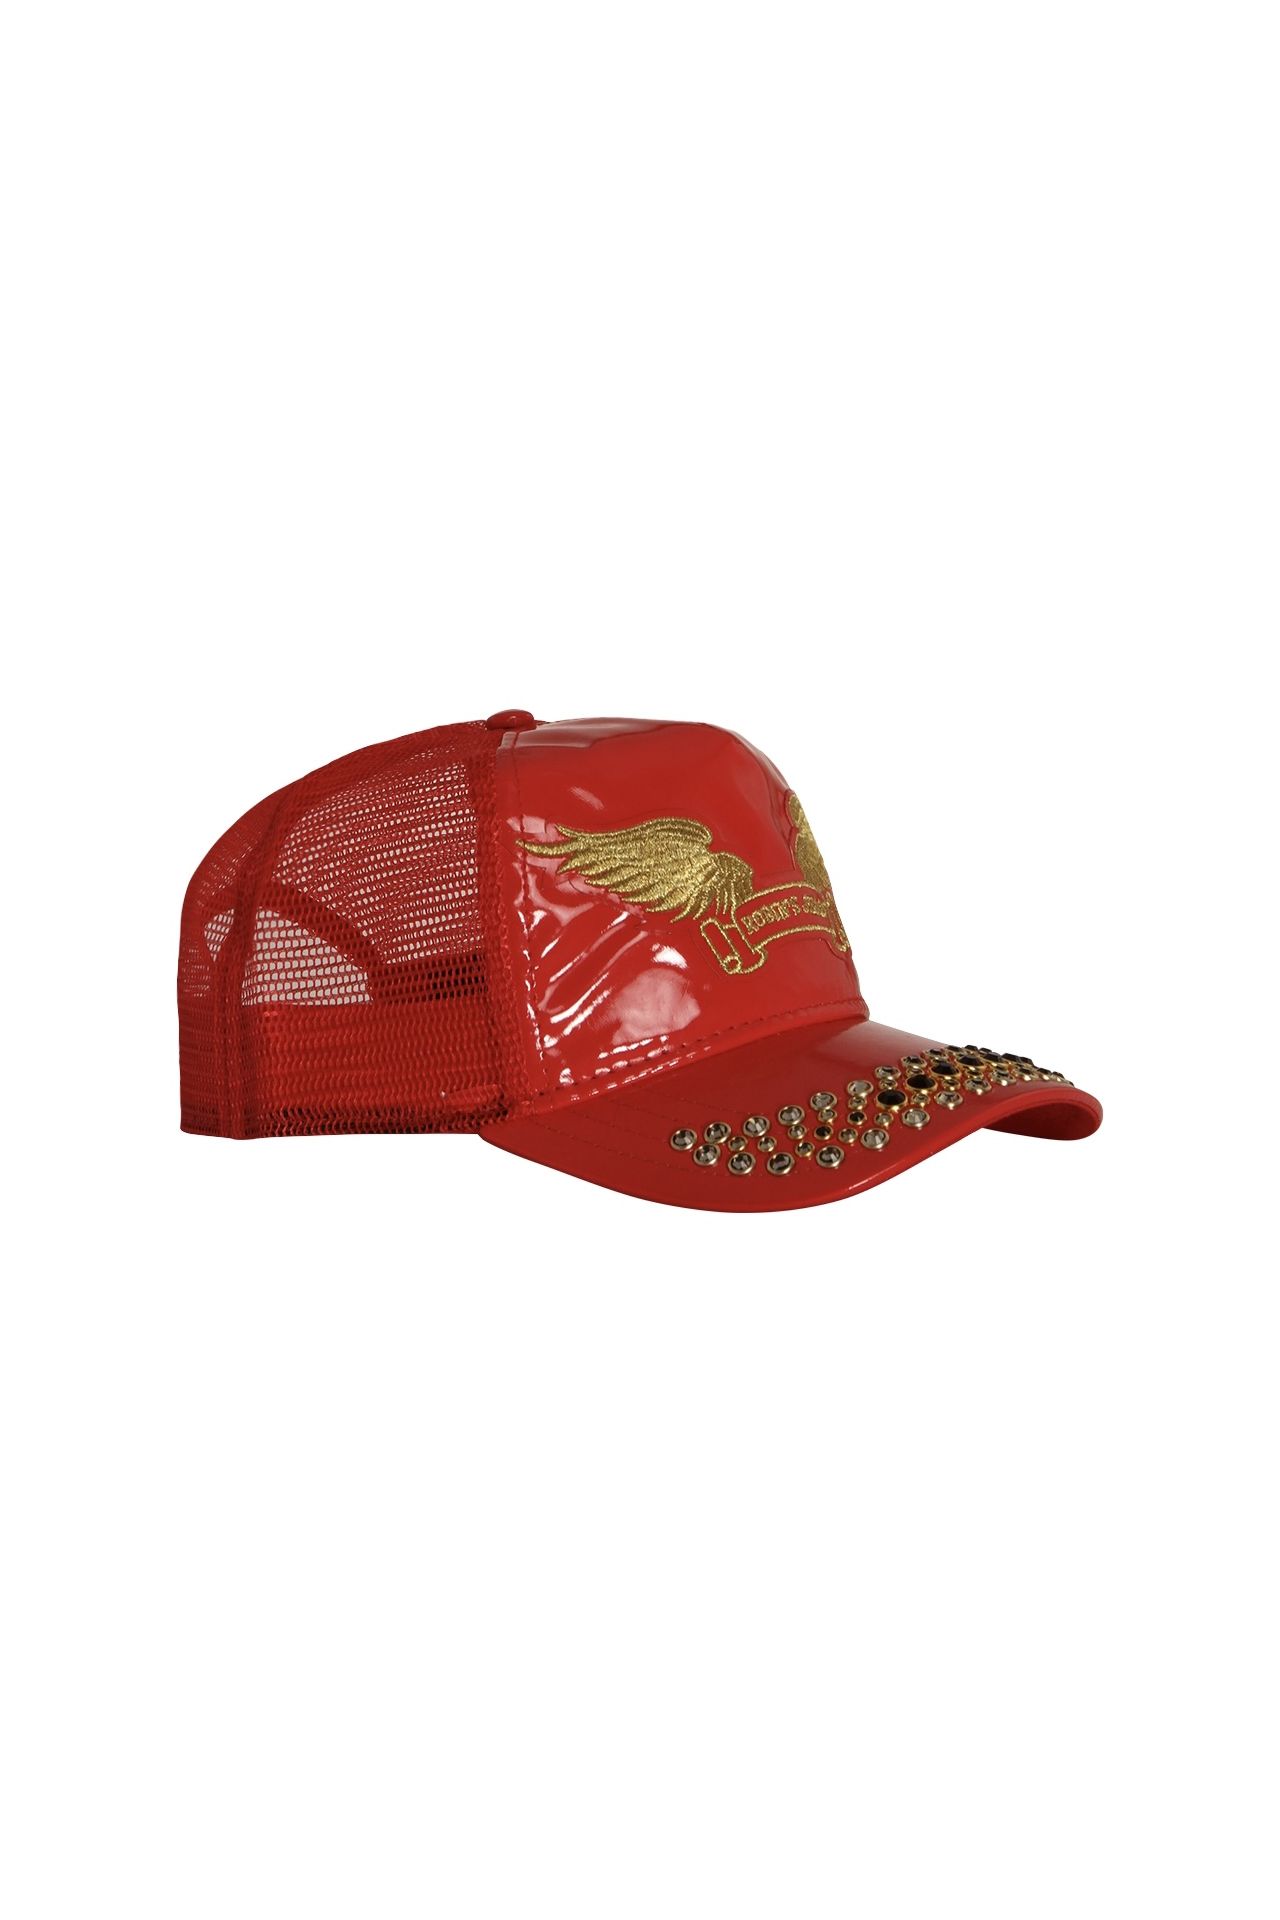 TRUCKER CAP IN PATENT RED WITH GOLD WINGS AND CRYSTALS